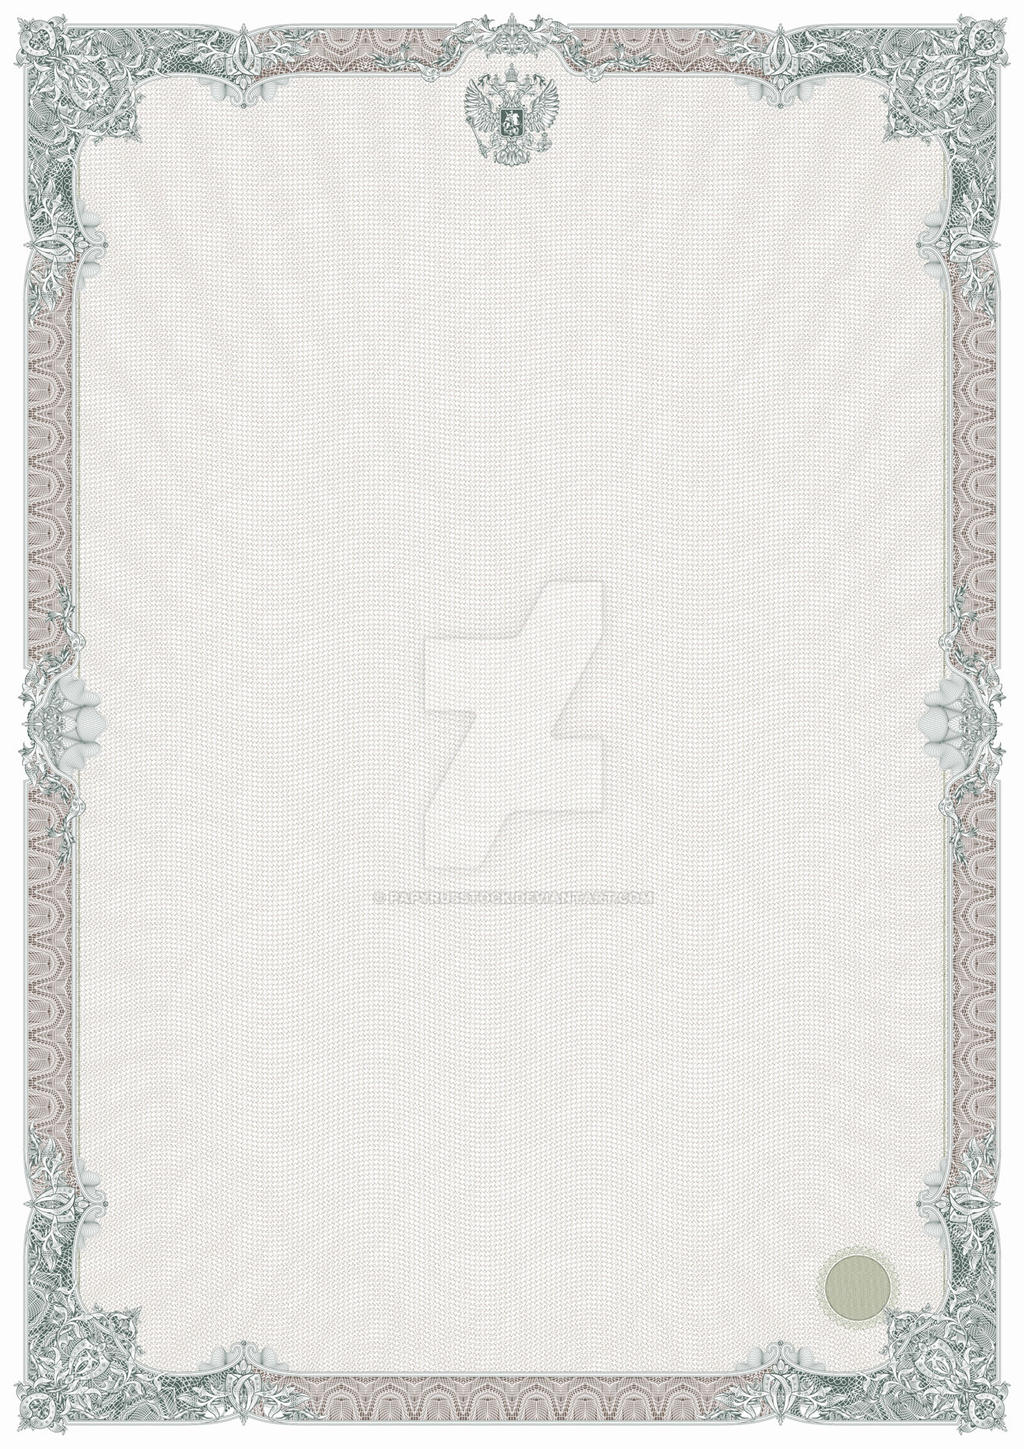 Blank template for certificate background. by PAPYRUSSTOCK on DeviantArt